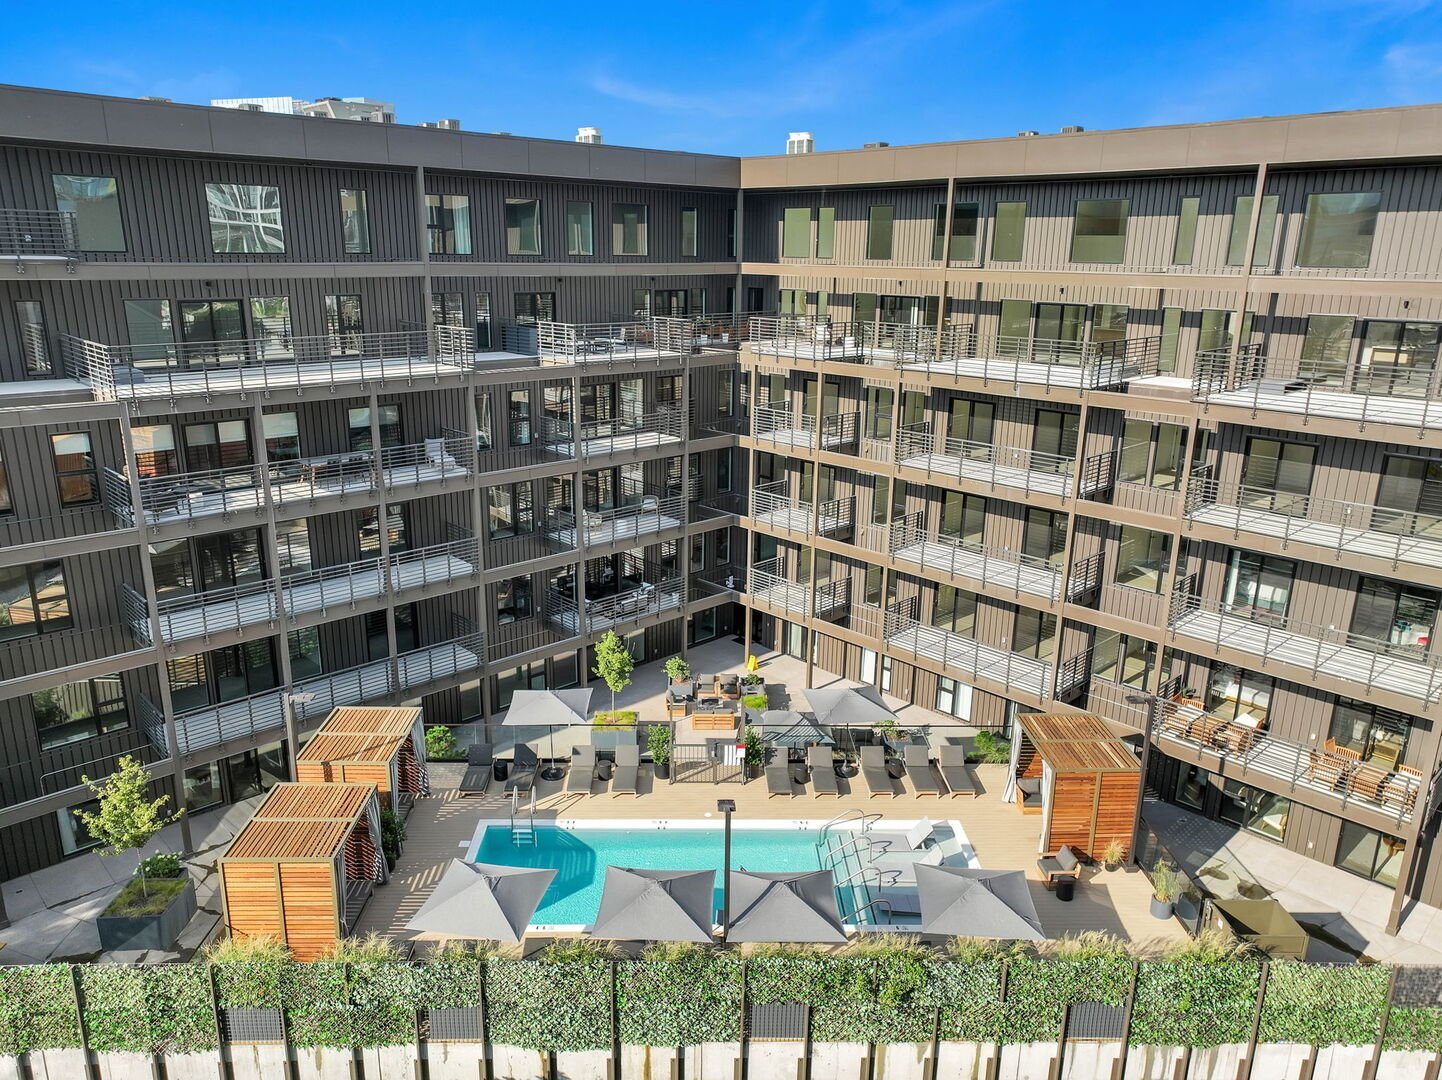 Communal Areas: Outdoor includes a sparkling blue pool, multiple outdoor furnishings and lounging areas, fire pit, ping pong, and BBQ.